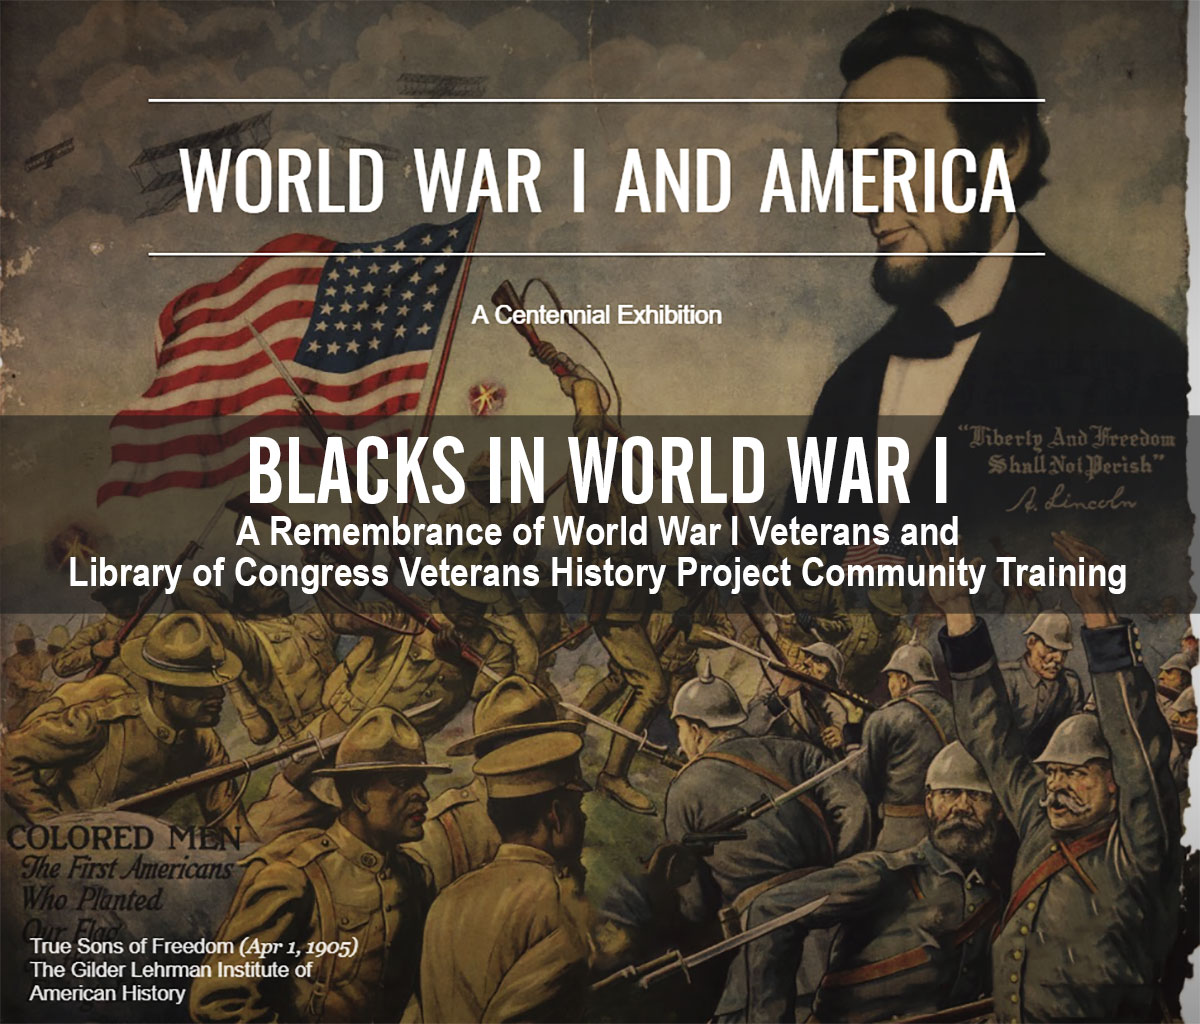 Blacks in World War I Cover Graphic